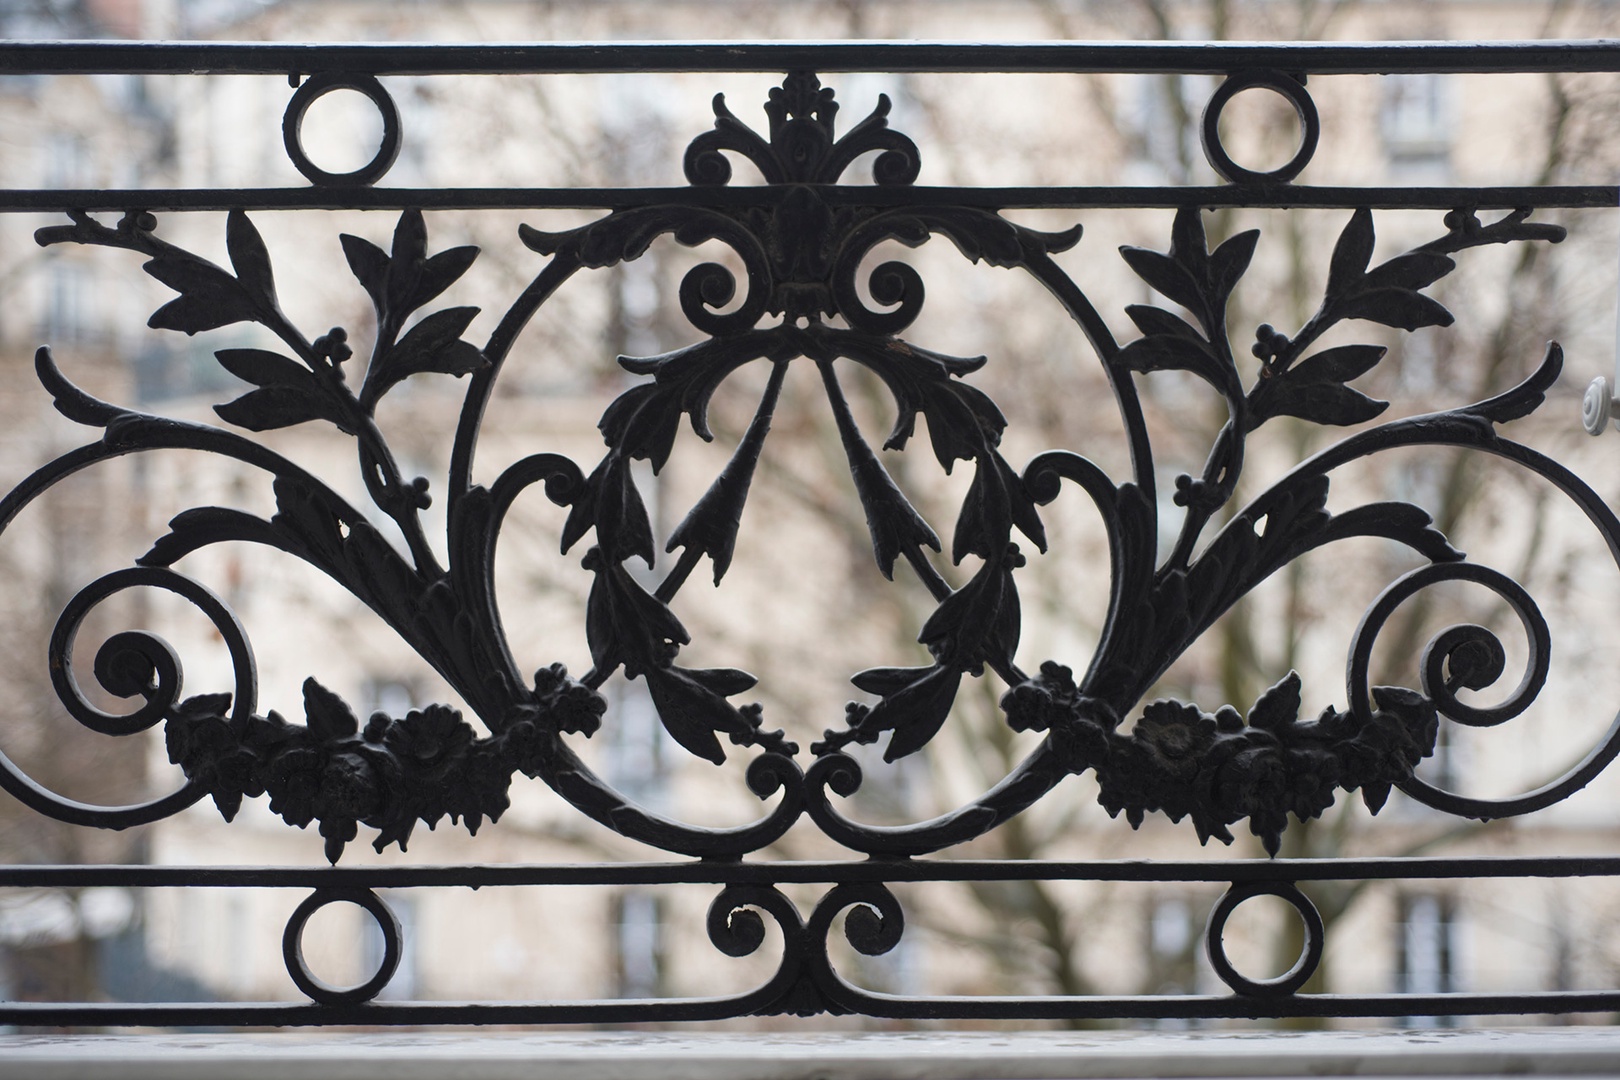 The apartment is filled with chic Parisian touches, like this iron grillwork on the window.